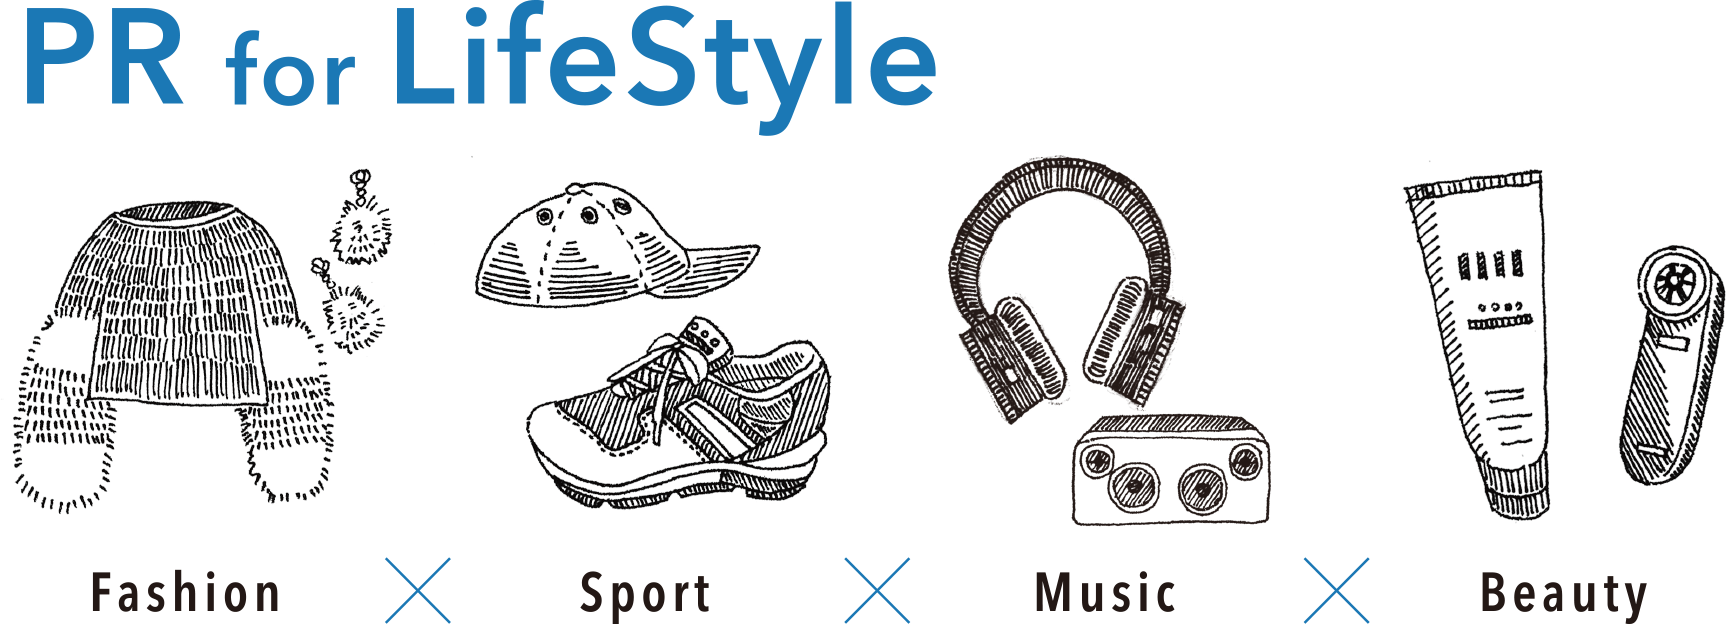 PR for Lifestyle - Fashion × Sport × Music × Beauty